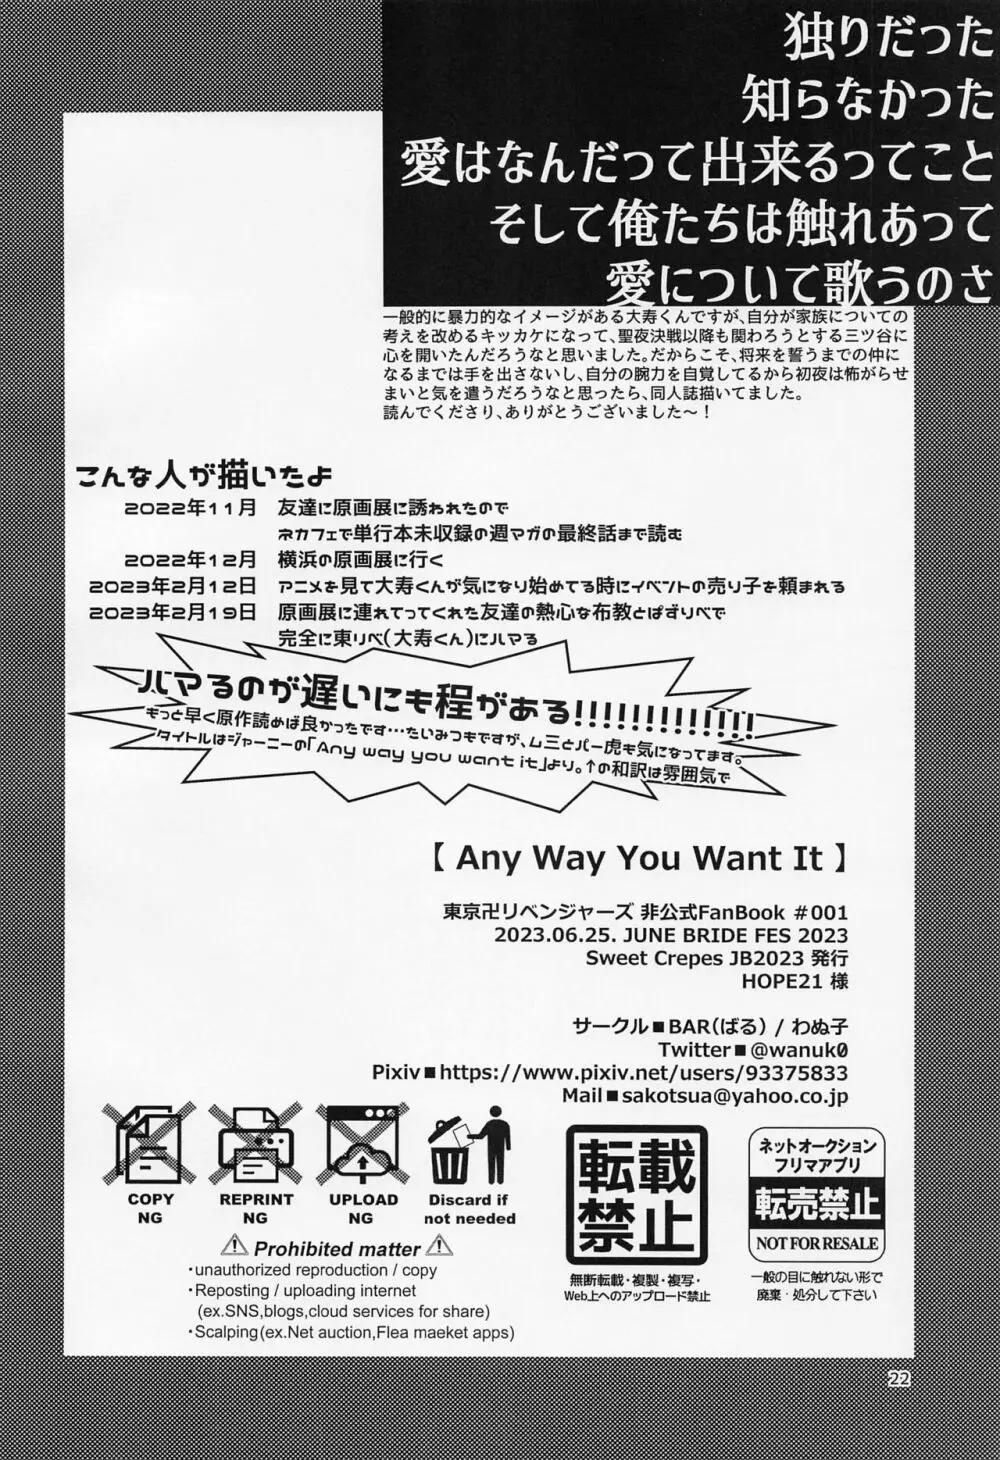 Any way you want it 21ページ